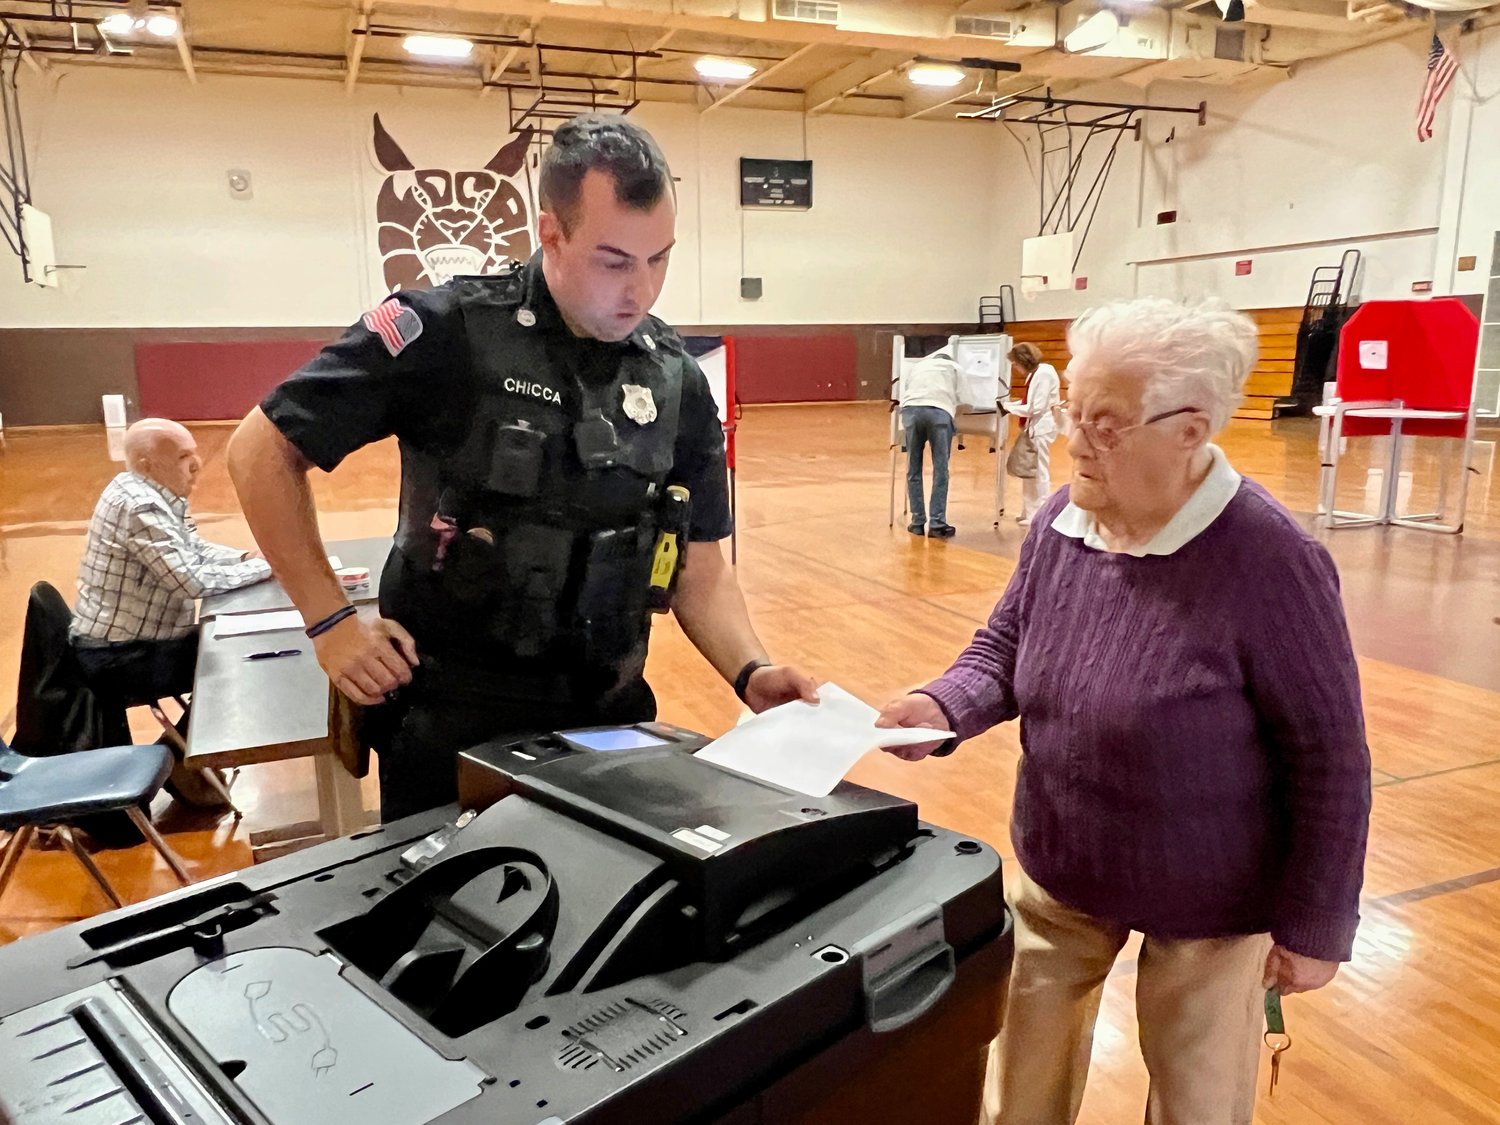 Westport police officer Mike Chicca assists a resident casting her ballot in Tuesday's election.